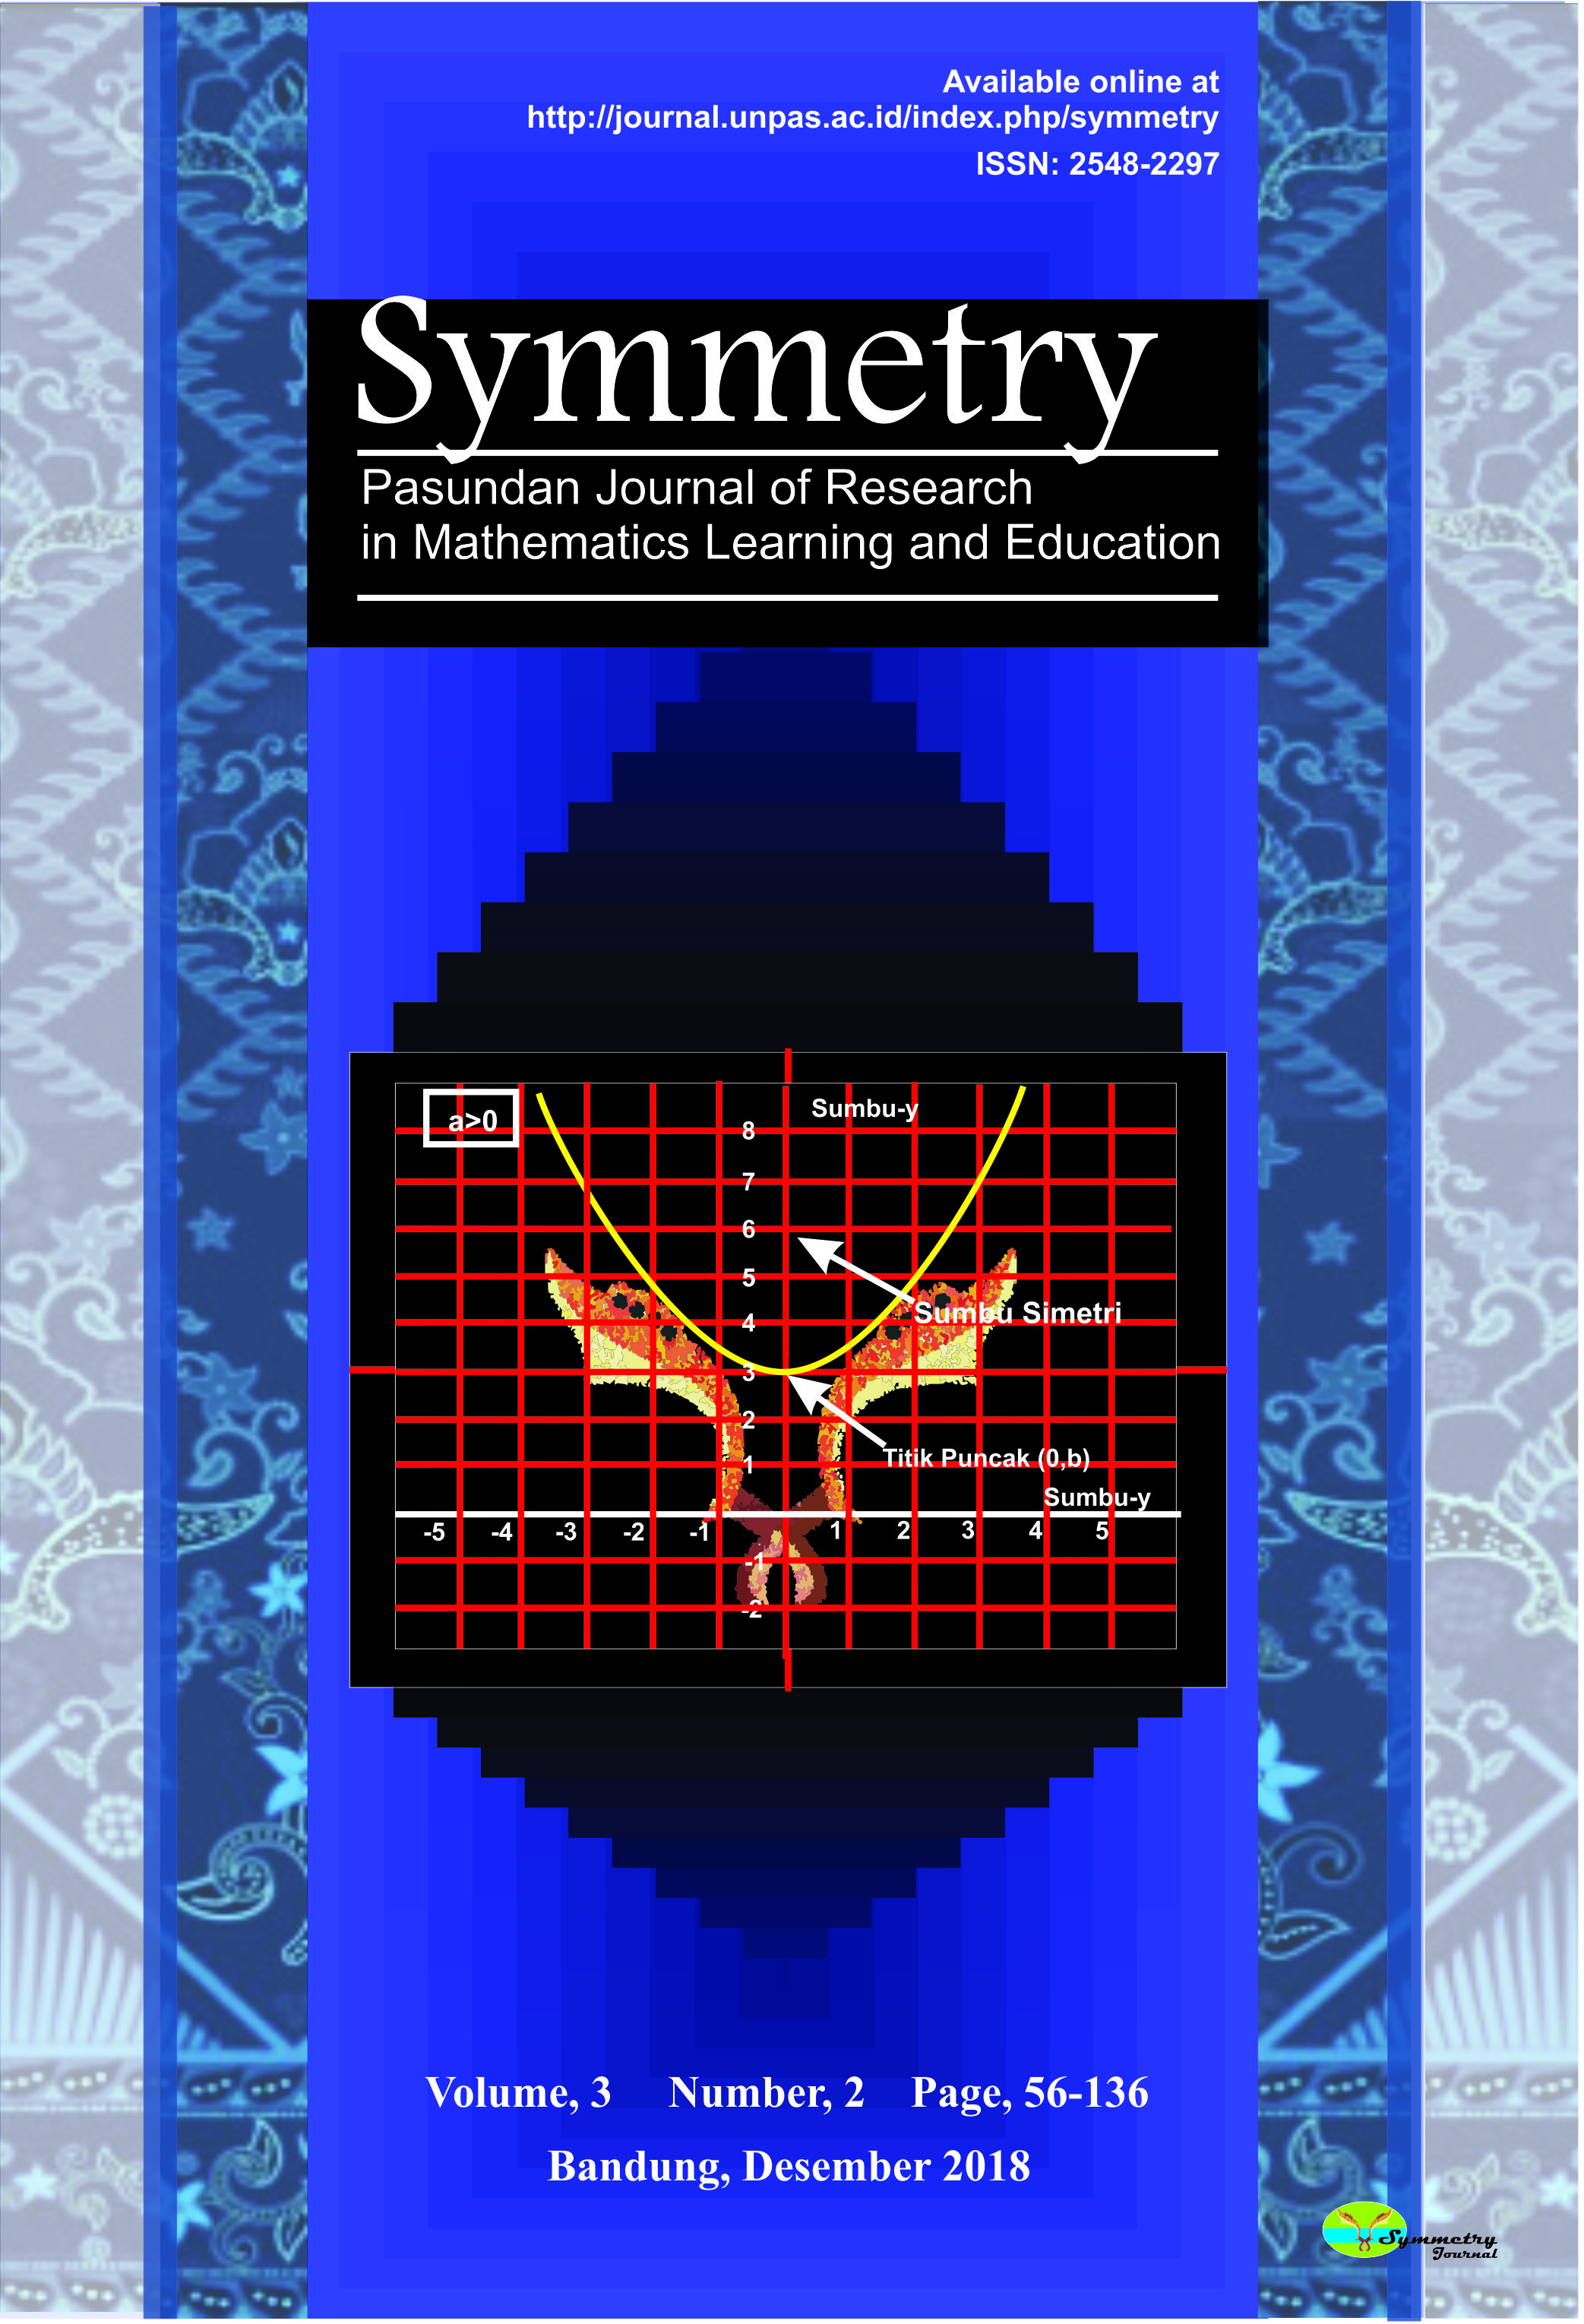 					View Vol. 4 No. 2 (2019): Symmetry: Pasundan Journal of Research in Mathematics Learning and Education
				